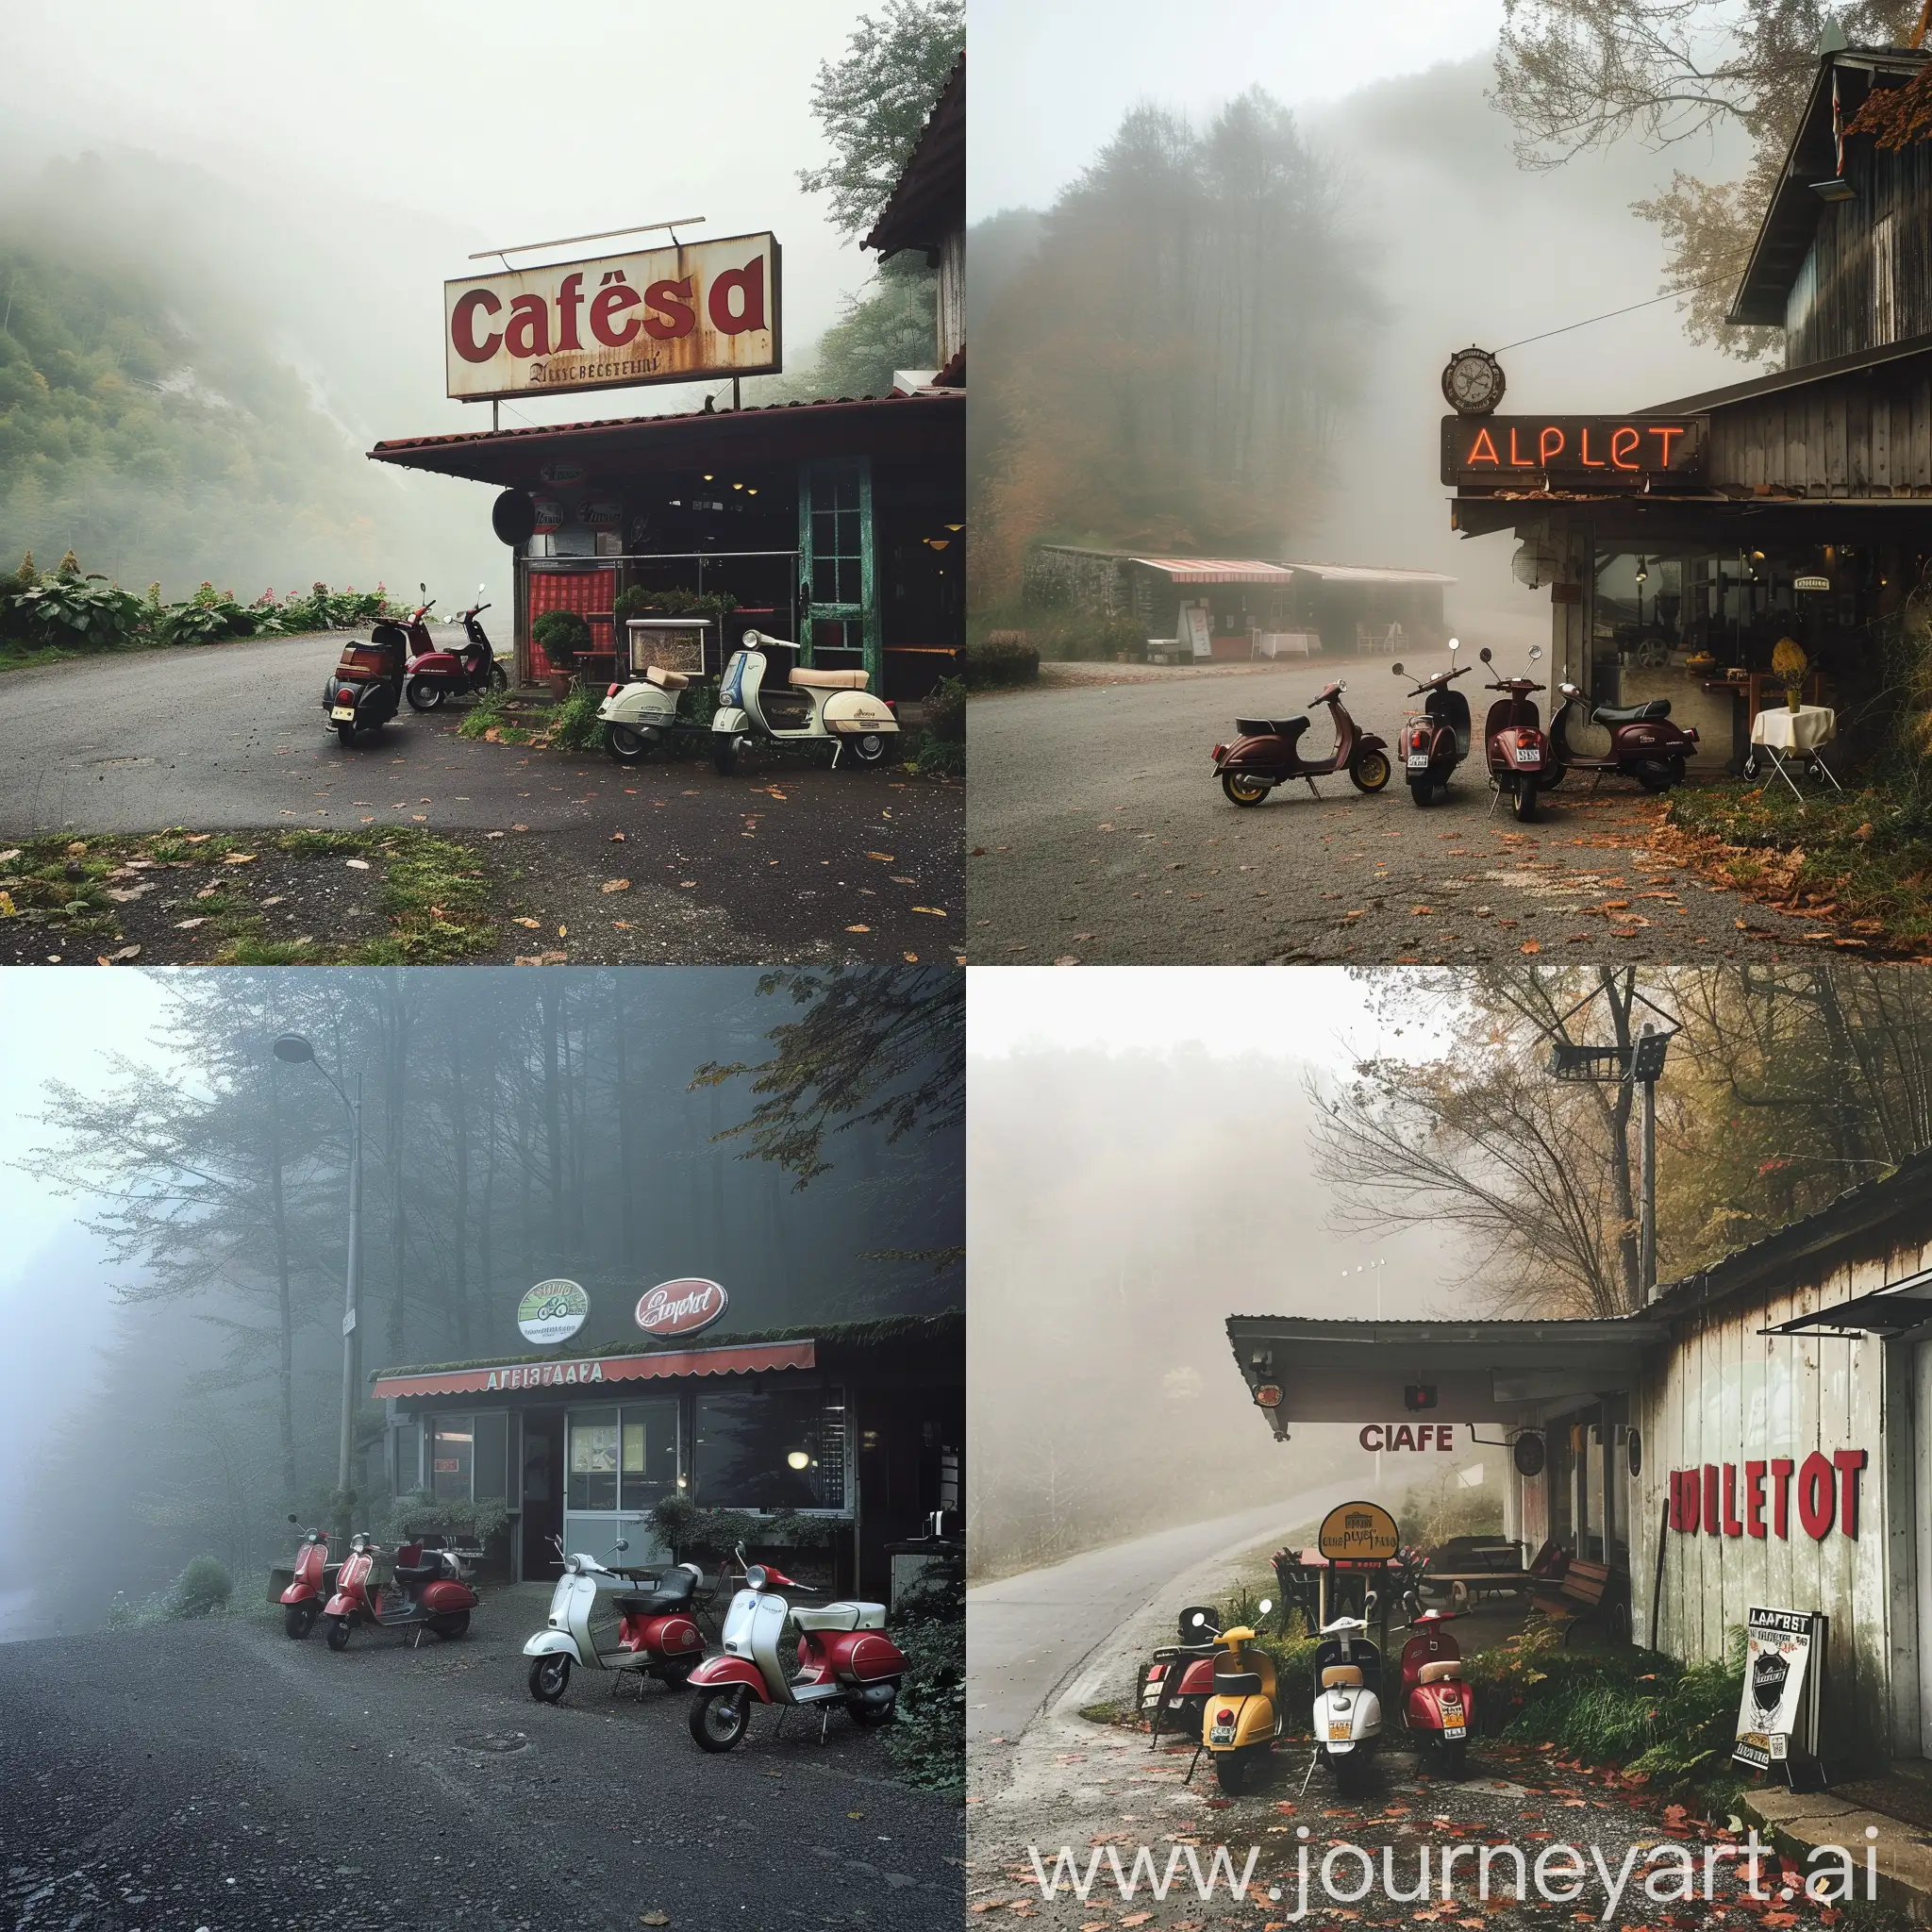 misty scene with a roadside cafe and some lambretta scooters parked outside
